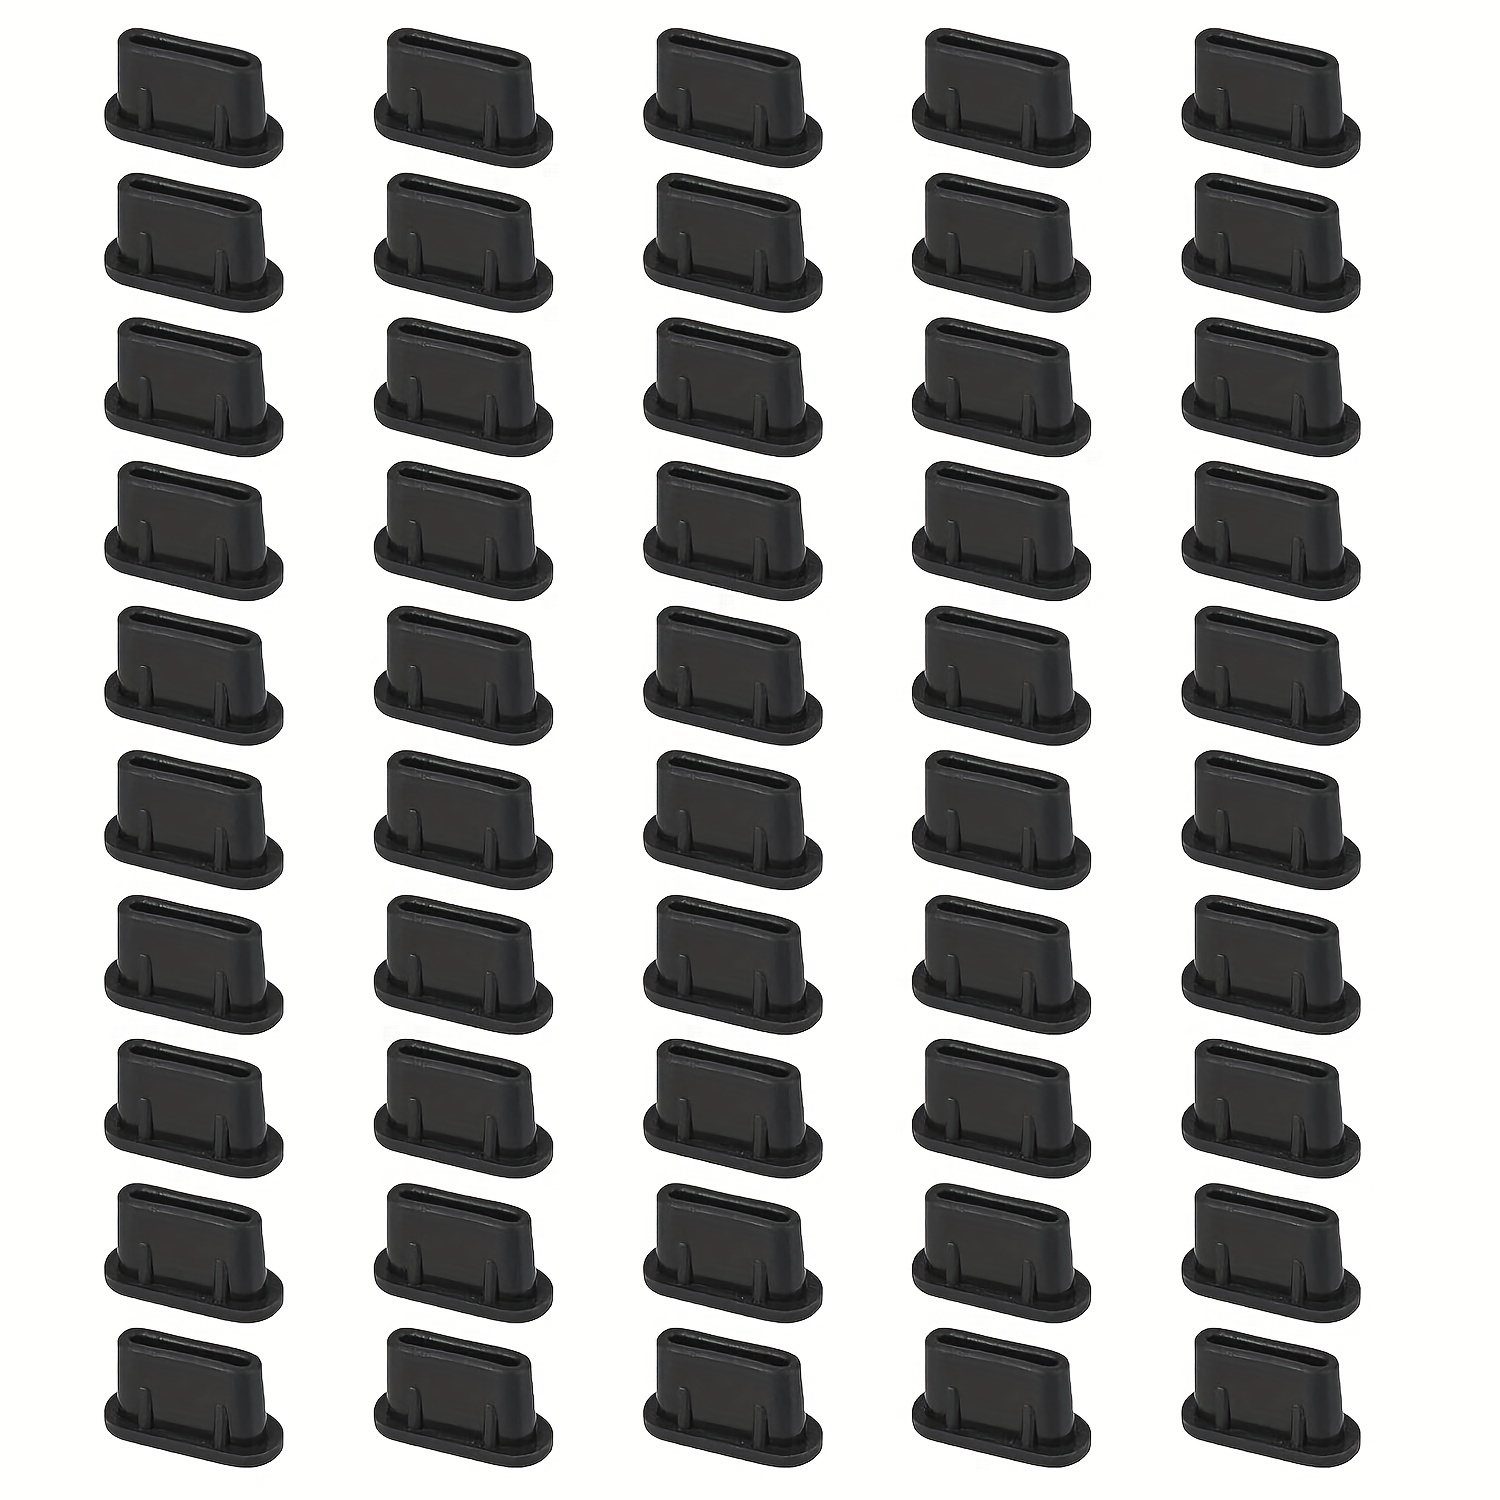 

50pcs usb c dust plug, type c cover usb-c charging port plugs for samsung galaxy s23 s22 ultra s21 fe s20, note 20, tab a8 s8, for All type-c devices & macbook laptop